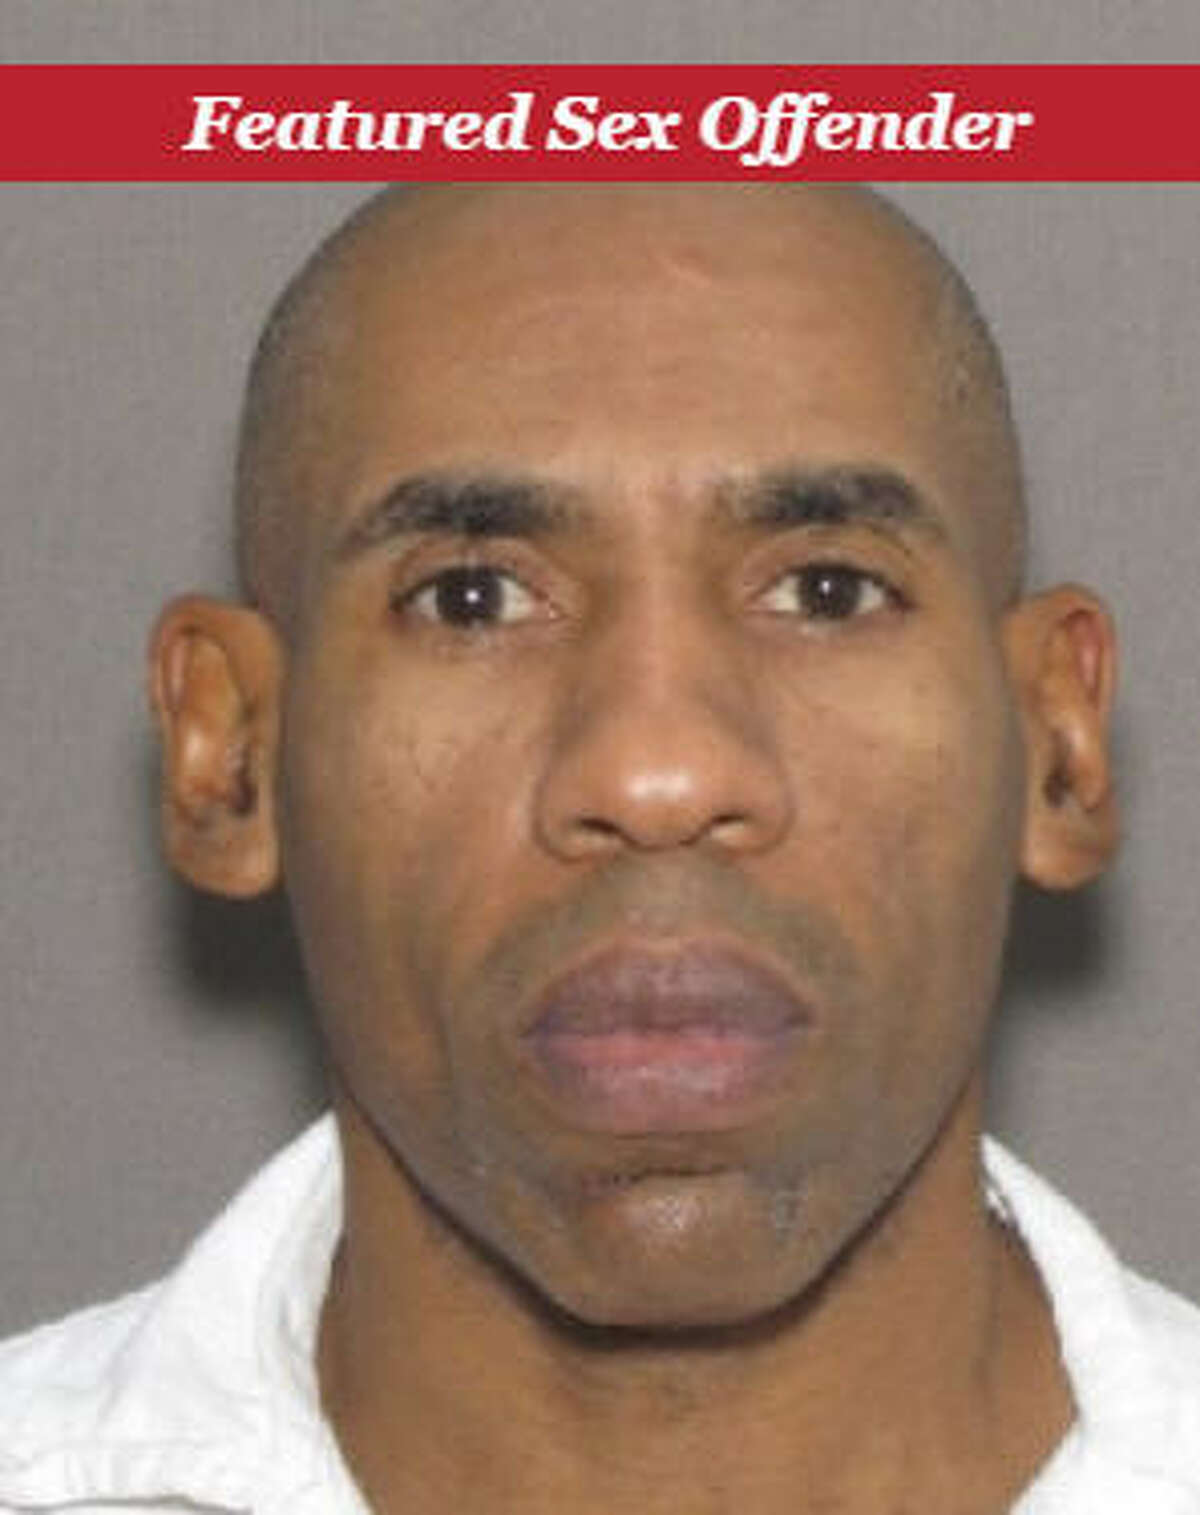 Johnny June Mason, Jr.: 01/03/69, 5'8", 150 lbs. Wanted for: Failure to Register as a Sex Offender, Parole Violation (Original Offense: Failure to Register as a Sex Offender) Last known address: Houston, Texas Reward: Up to 83,000